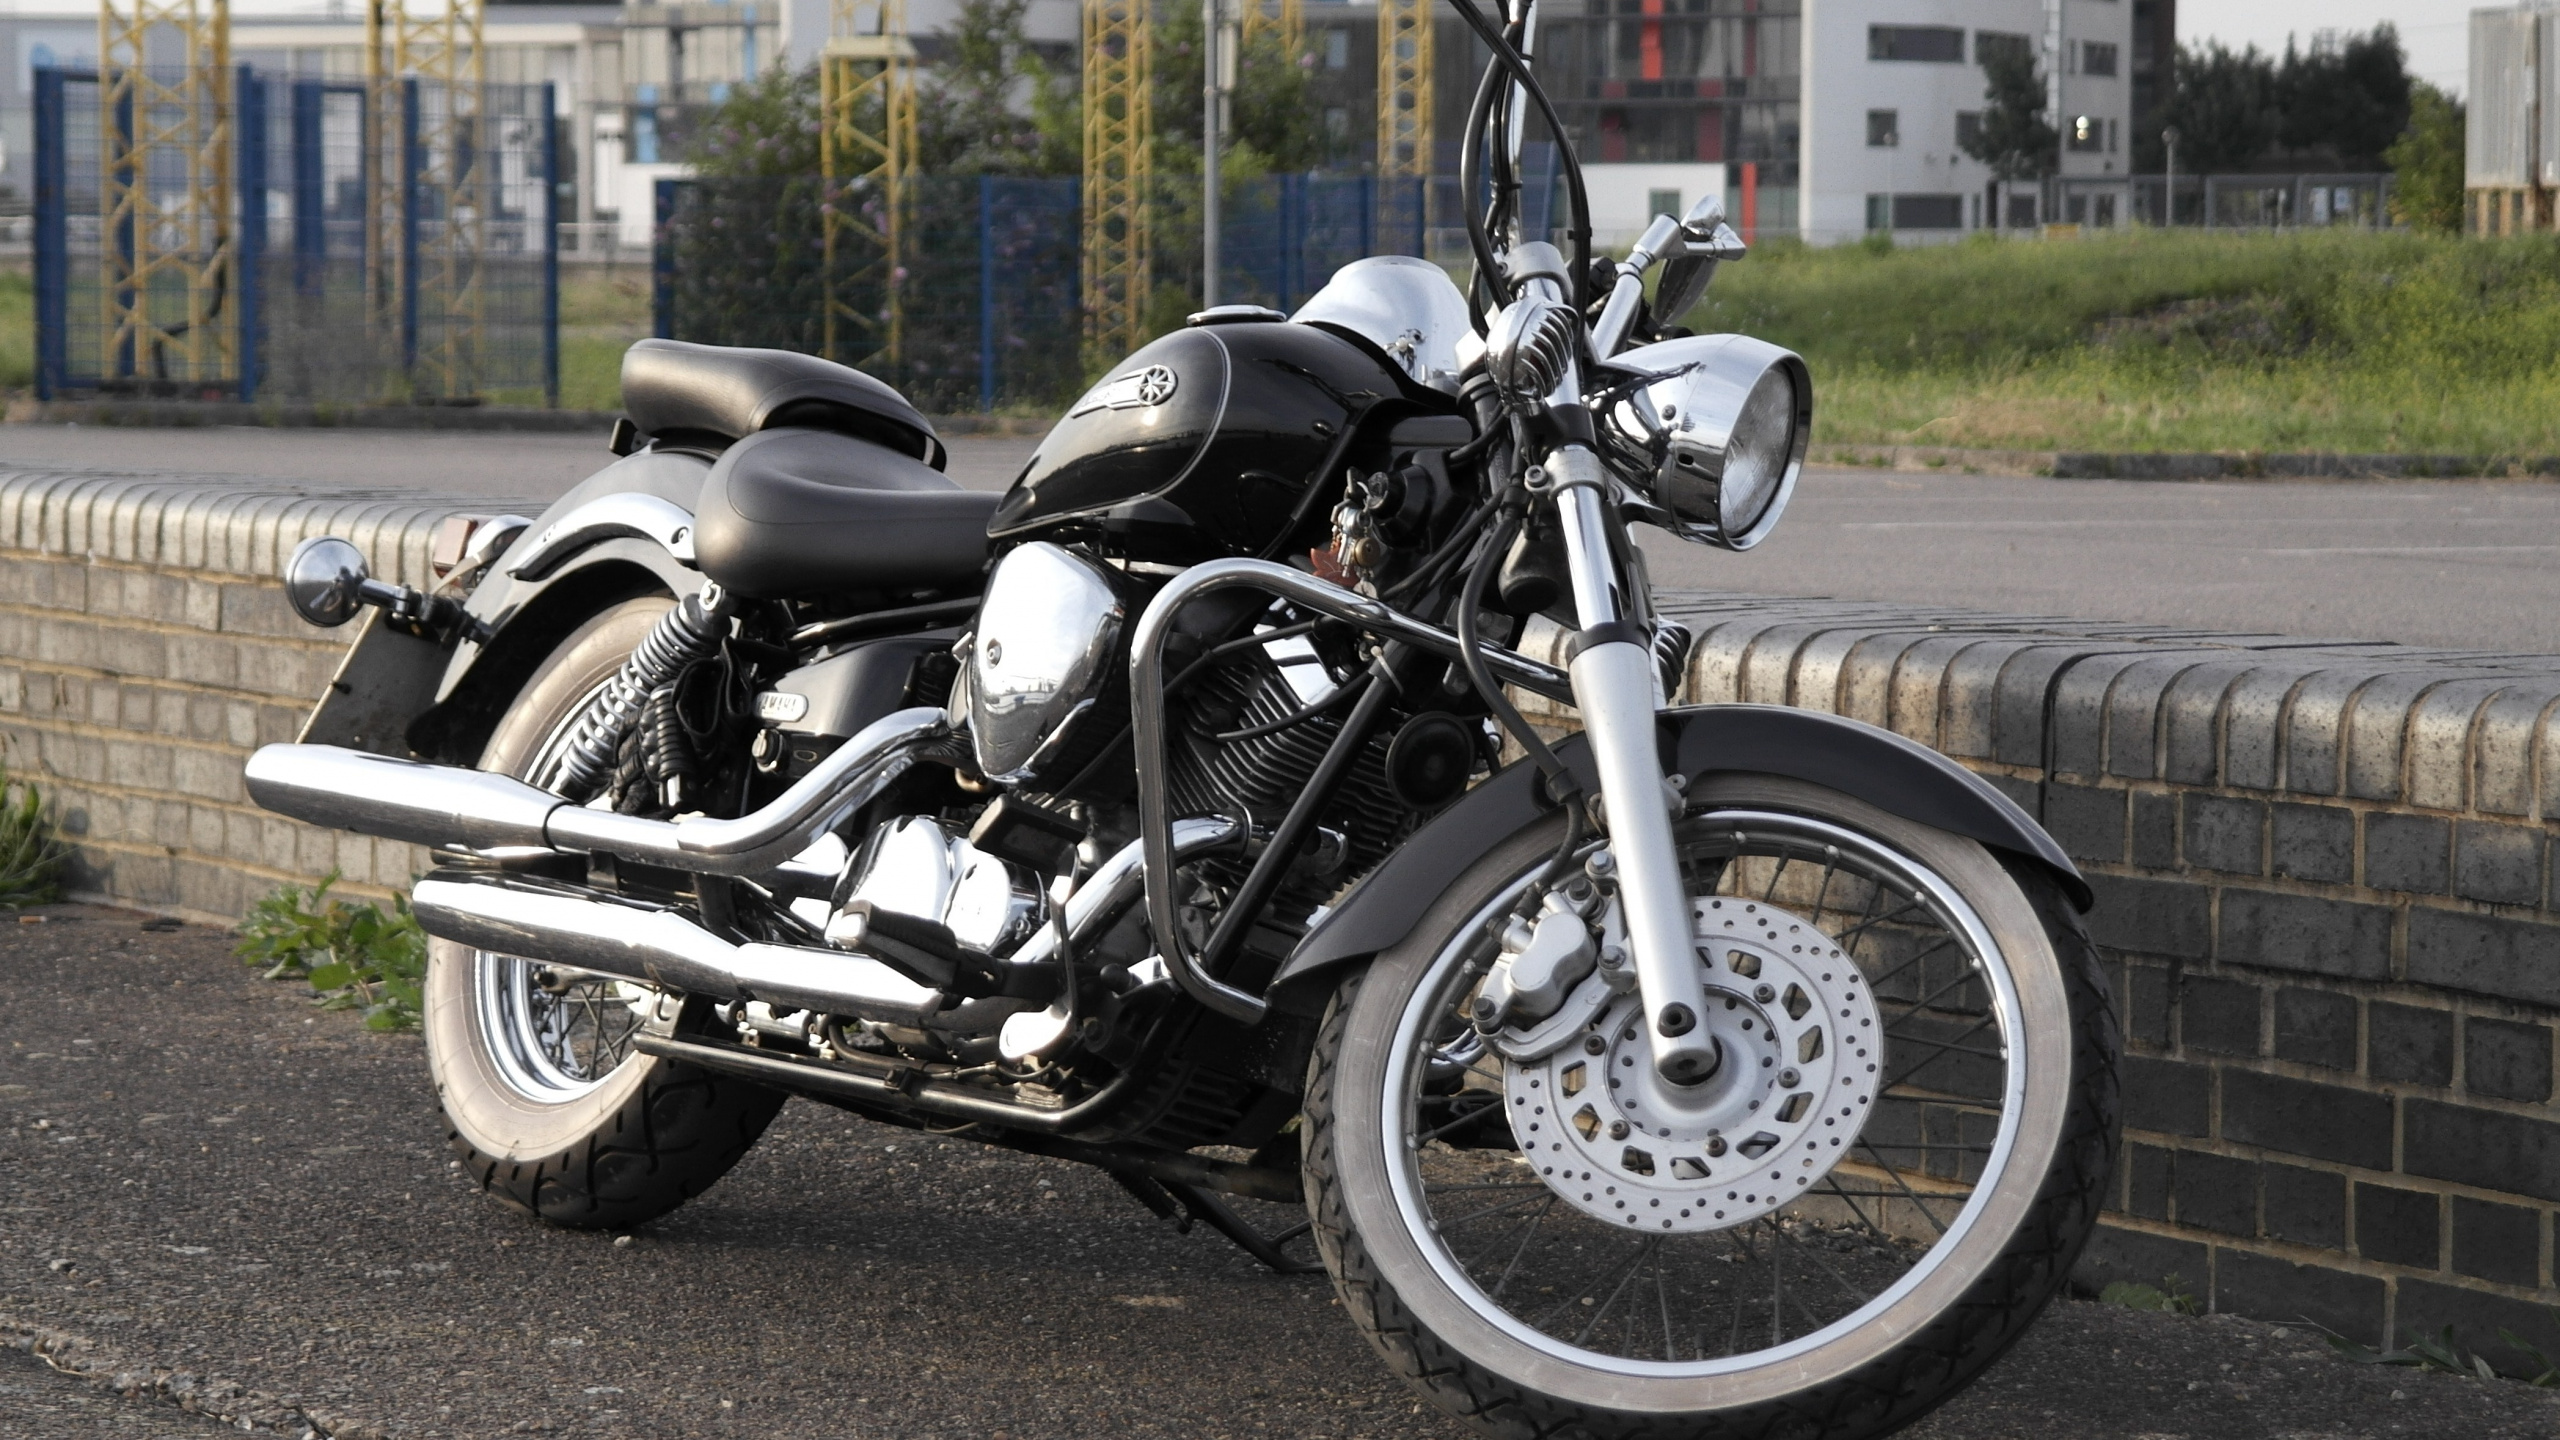 Black and Silver Cruiser Motorcycle on Road During Daytime. Wallpaper in 2560x1440 Resolution